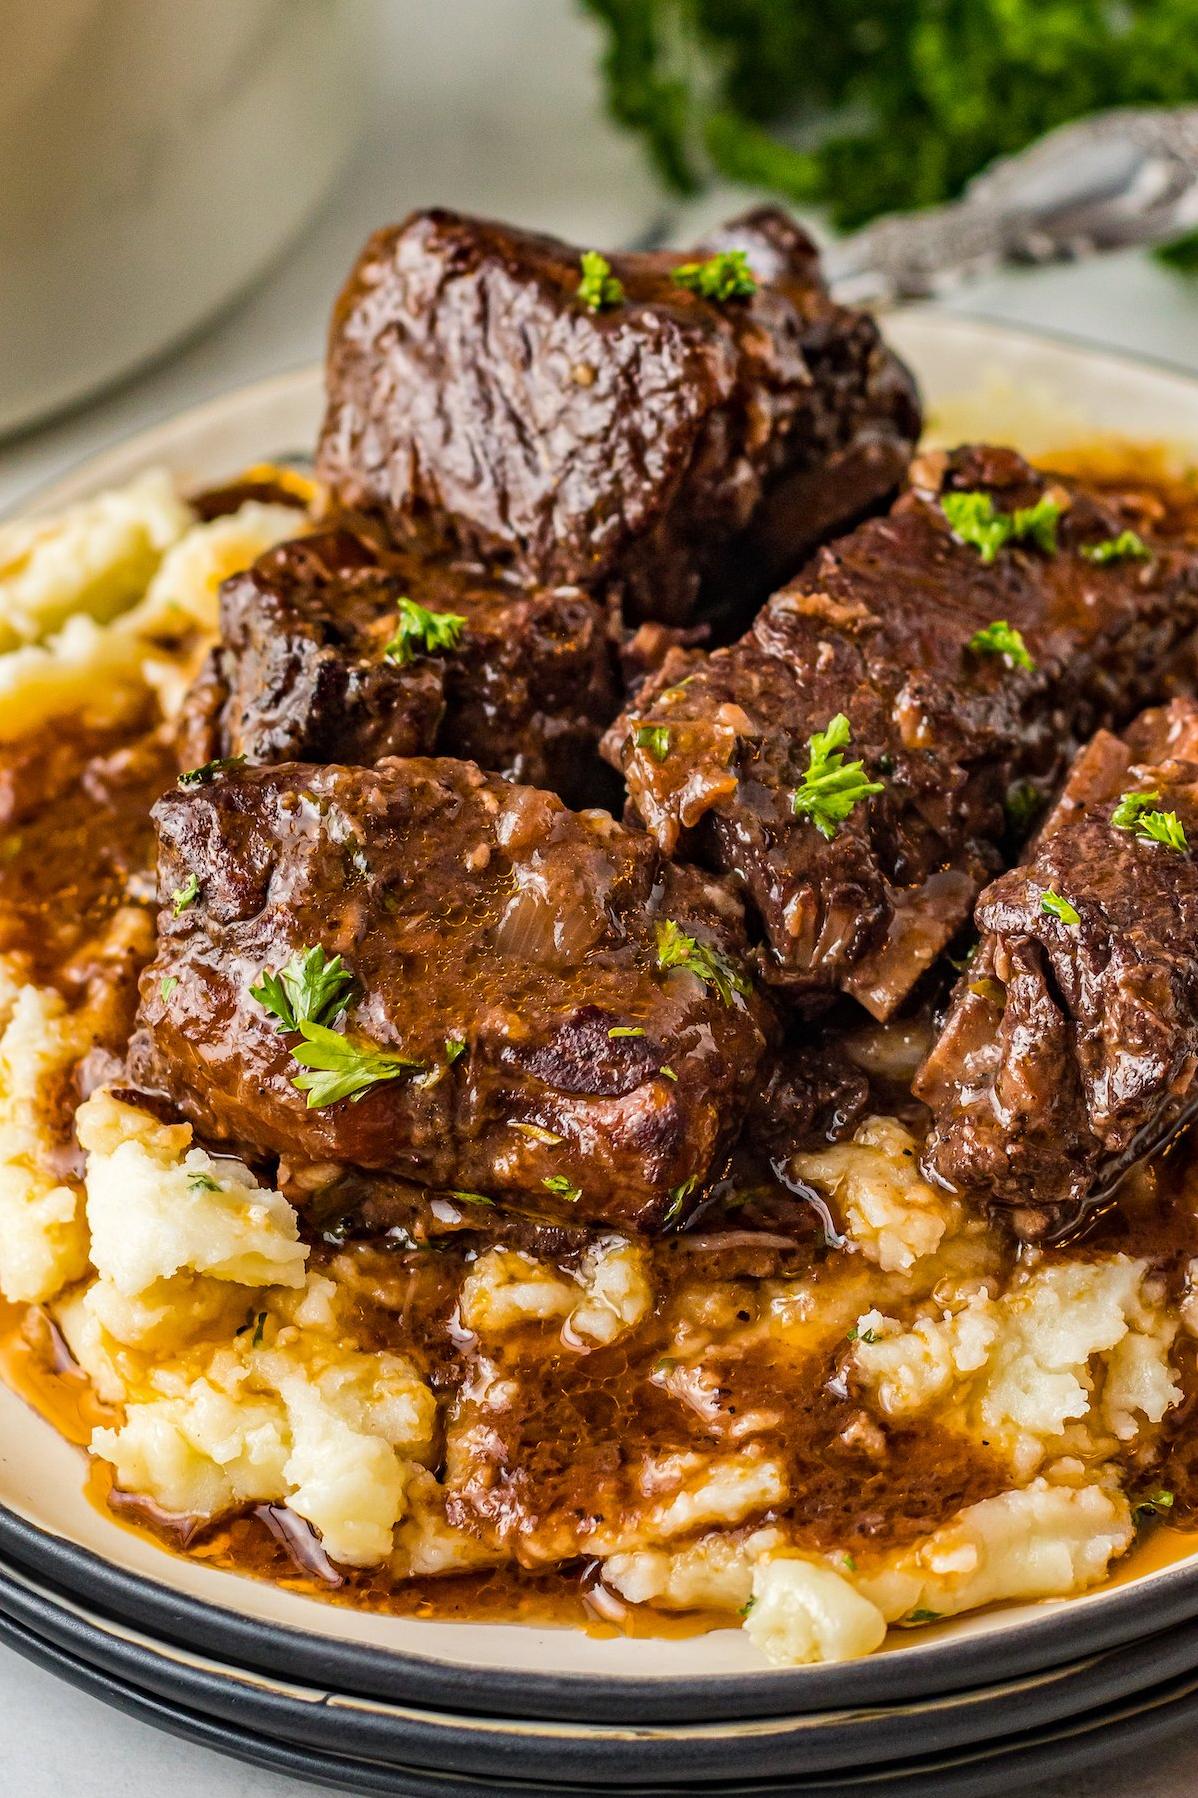  Prepare for a culinary adventure with this delicious beef cooked in red wine sauce.